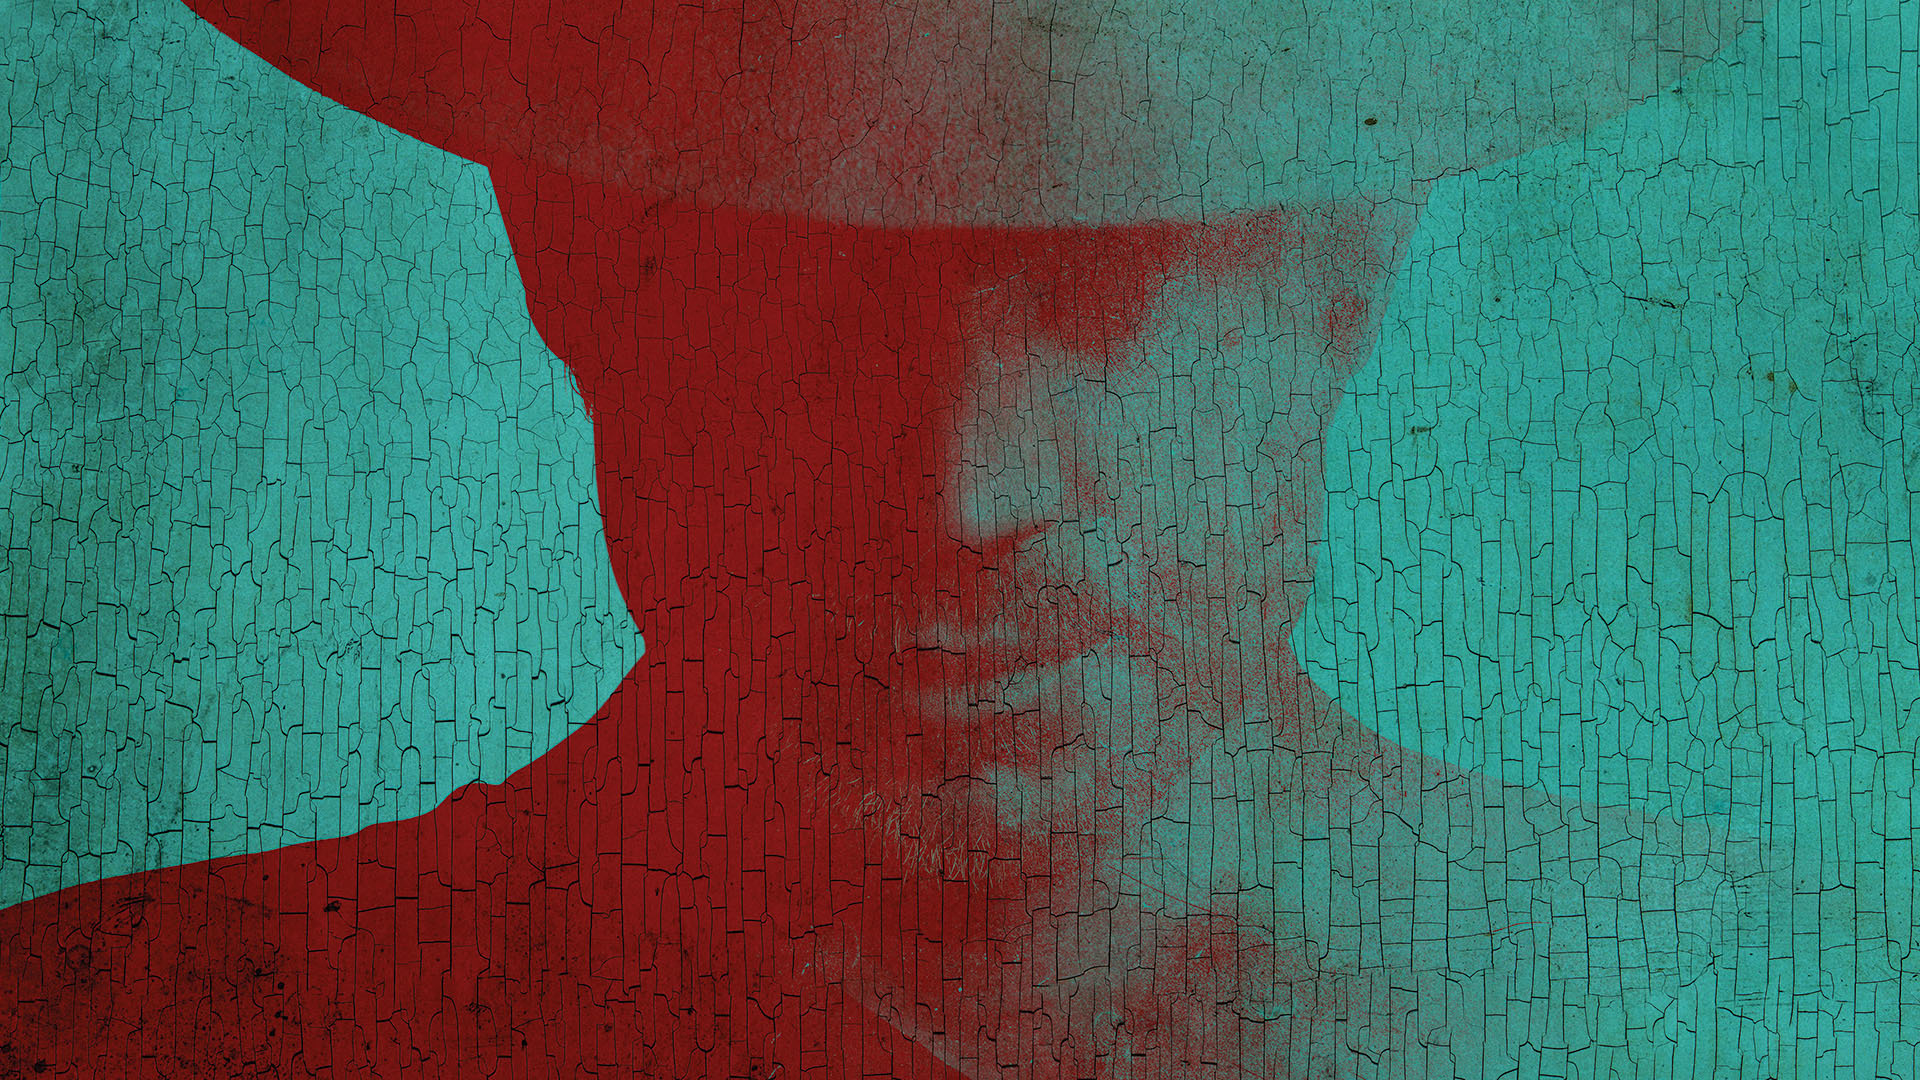 Justified TV Series, High-definition wallpaper, Iconic imagery, TV show artwork, 1920x1080 Full HD Desktop